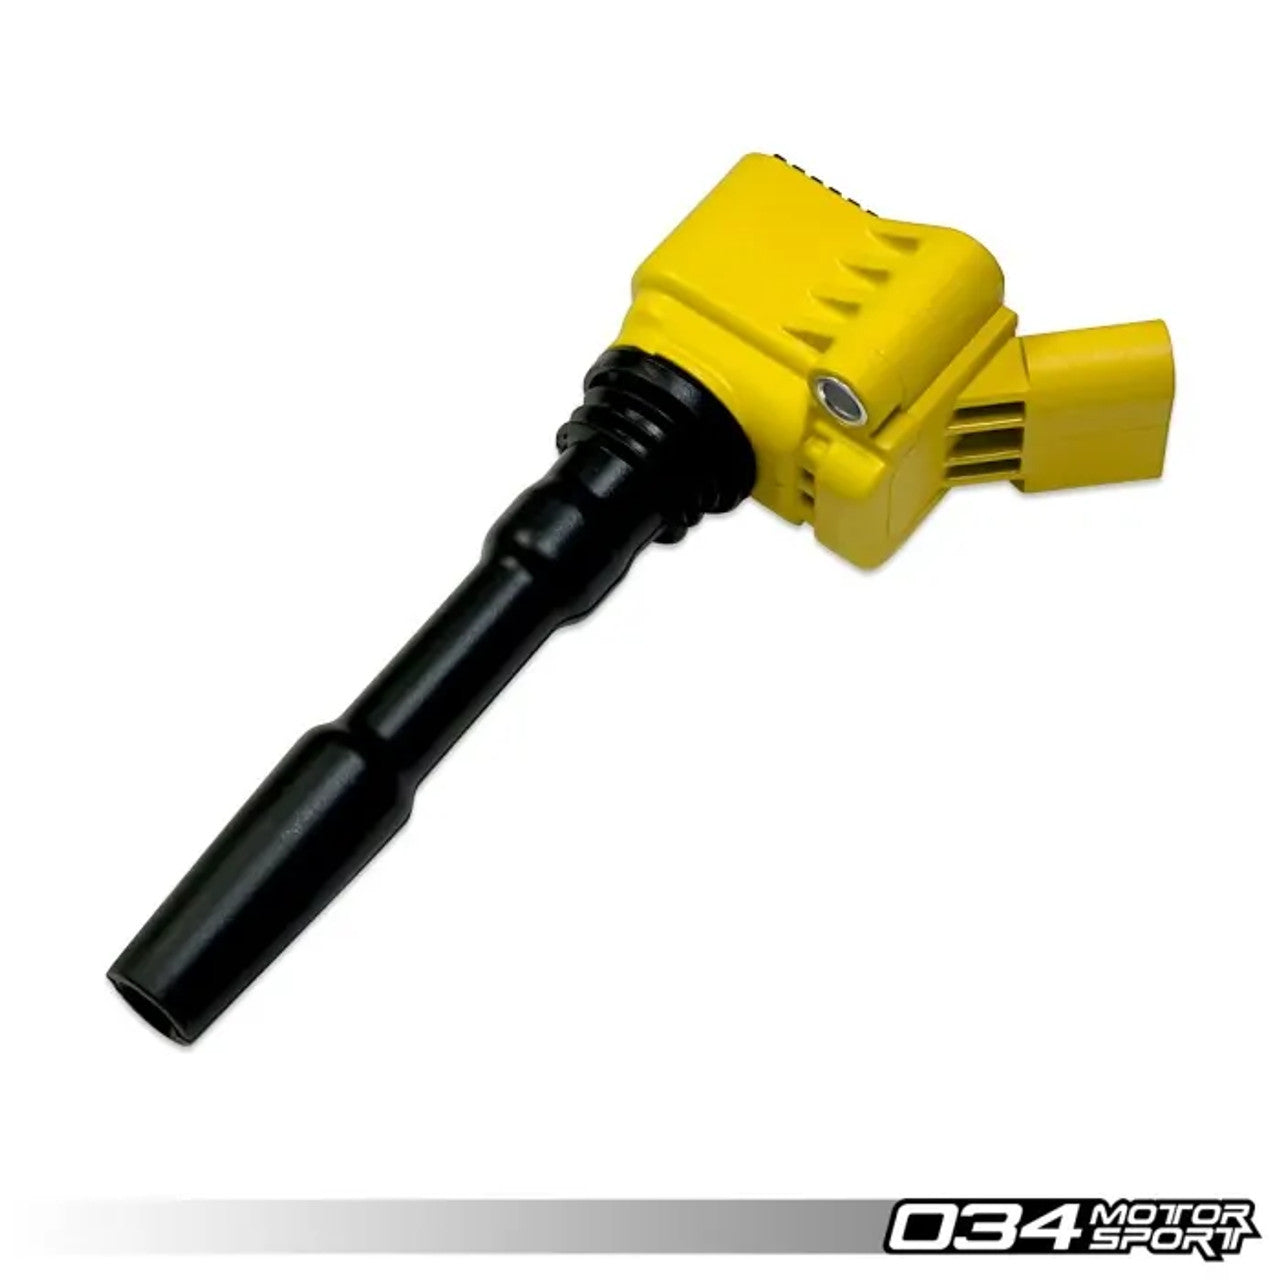 034Motorsport - High Output Ignition Coil Pack Yellow - EA8XX Engines